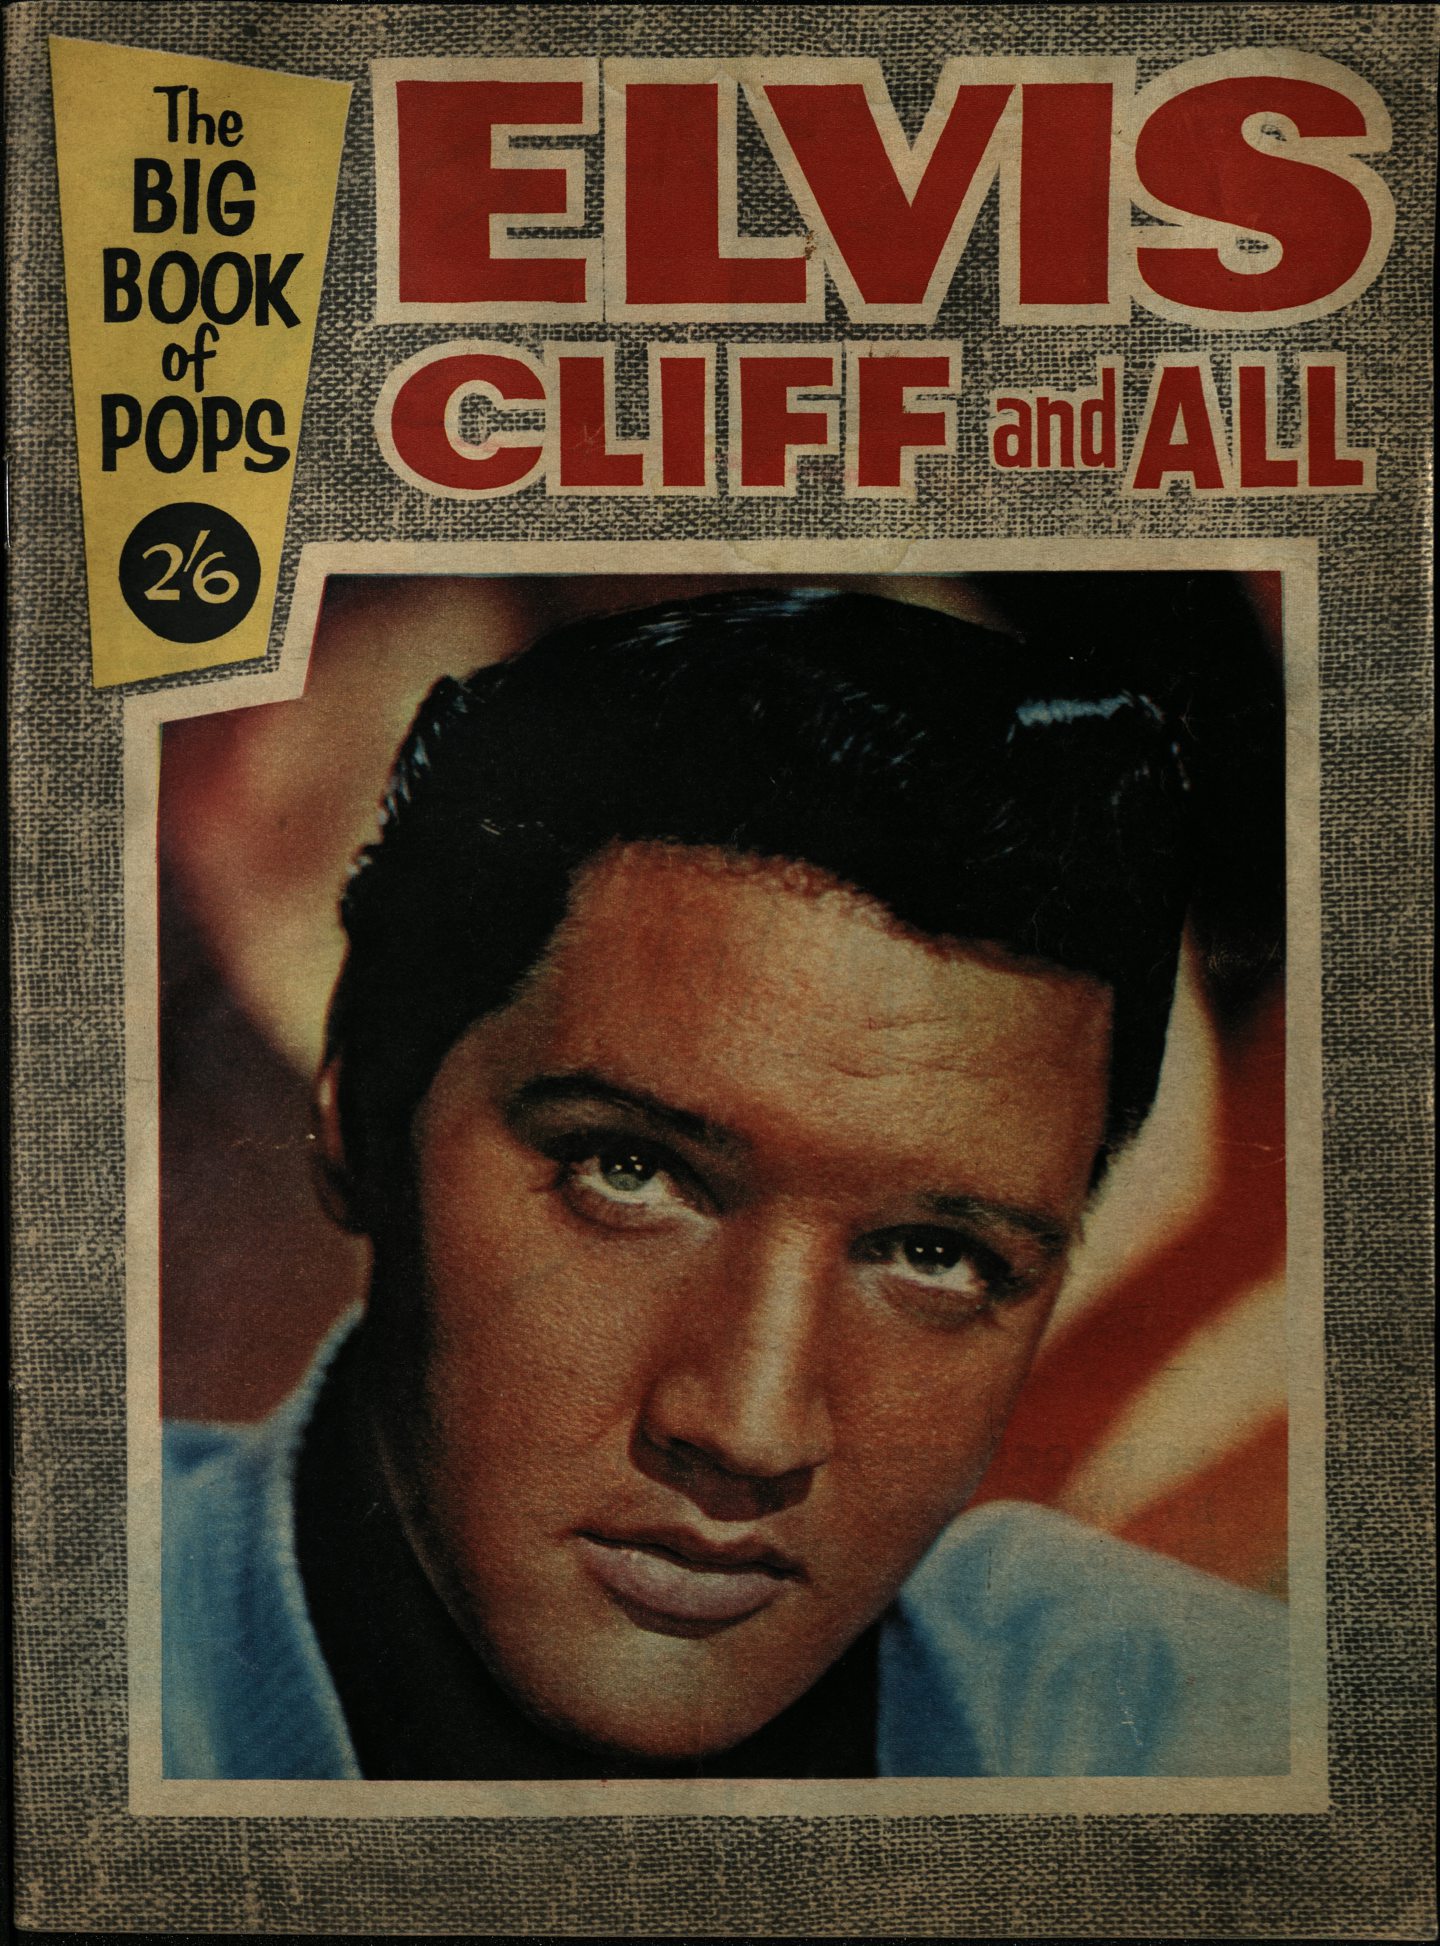 Elvis Presley on the cover of DC Thomson's Elvis, Cliff and All publication